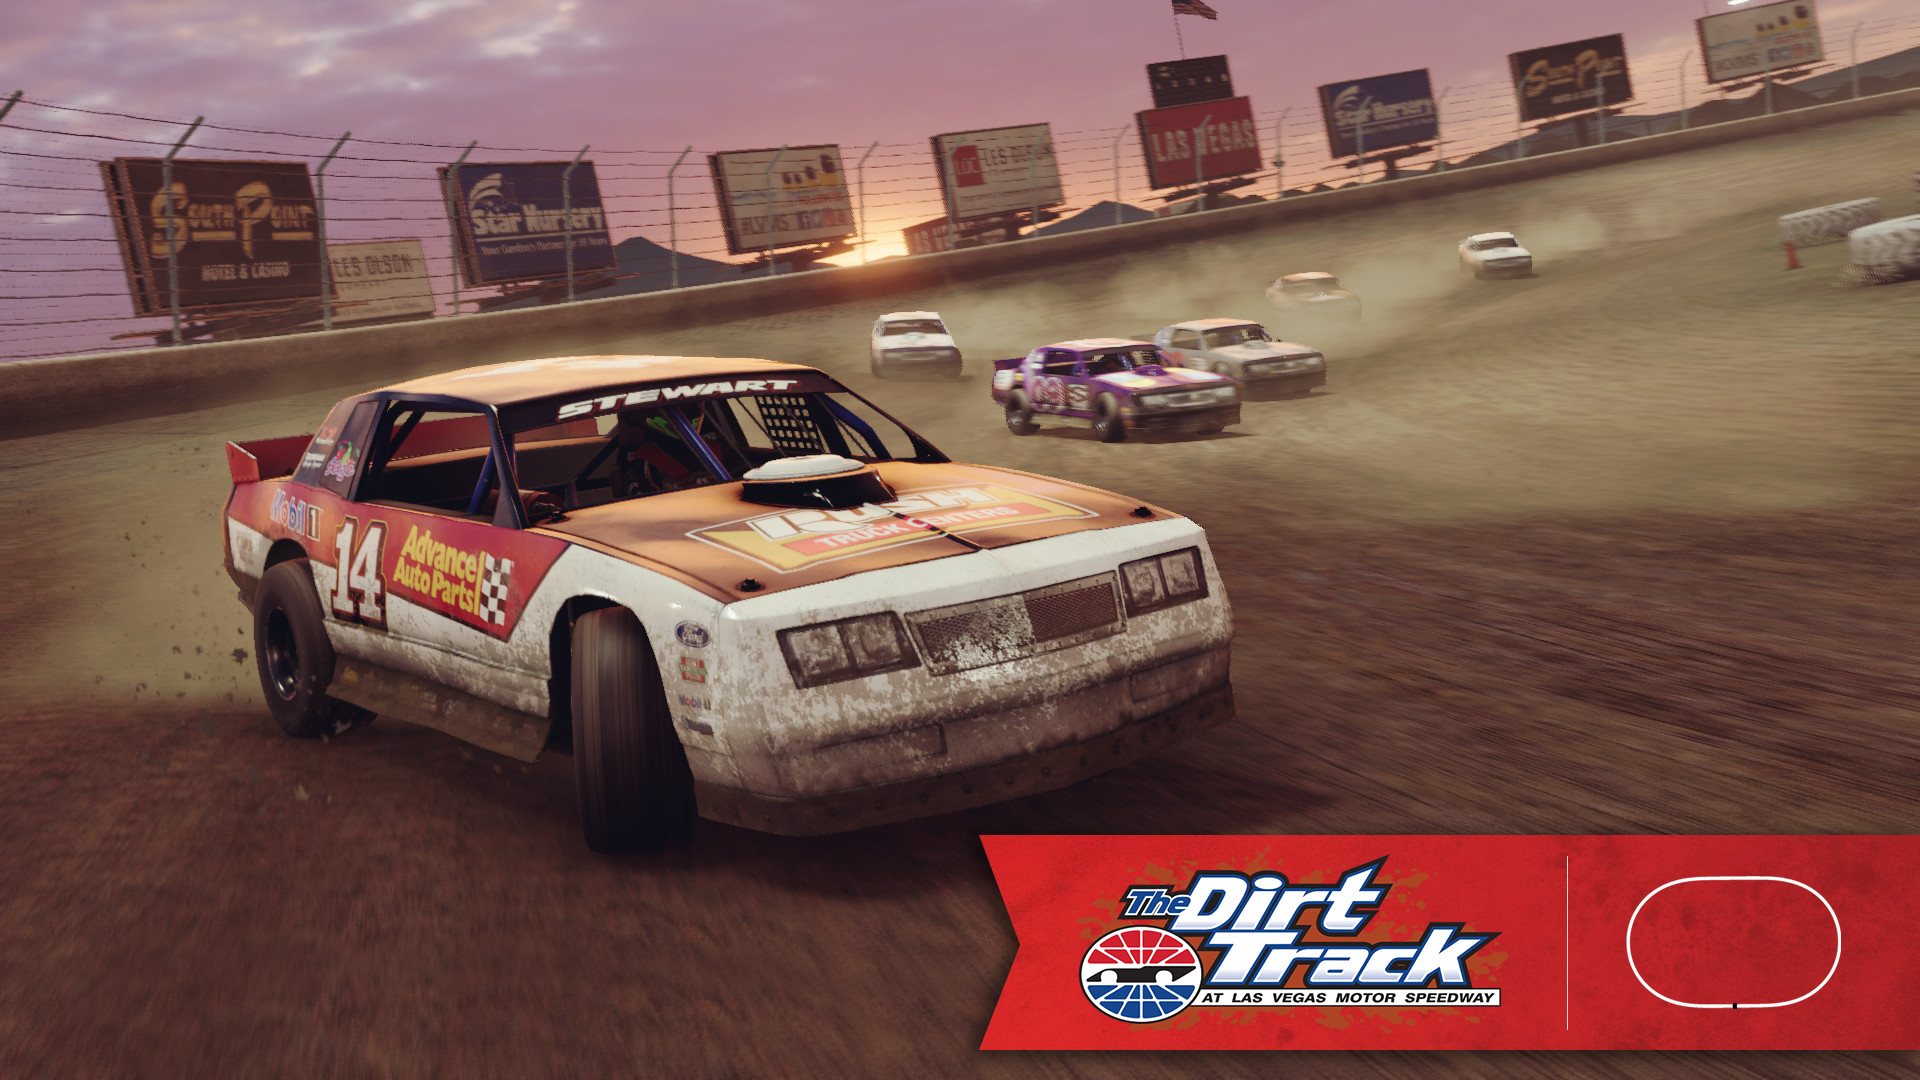 Tony Stewart's All-American Racing: The Dirt Track at Las Vegas Motor Speedway Featured Screenshot #1